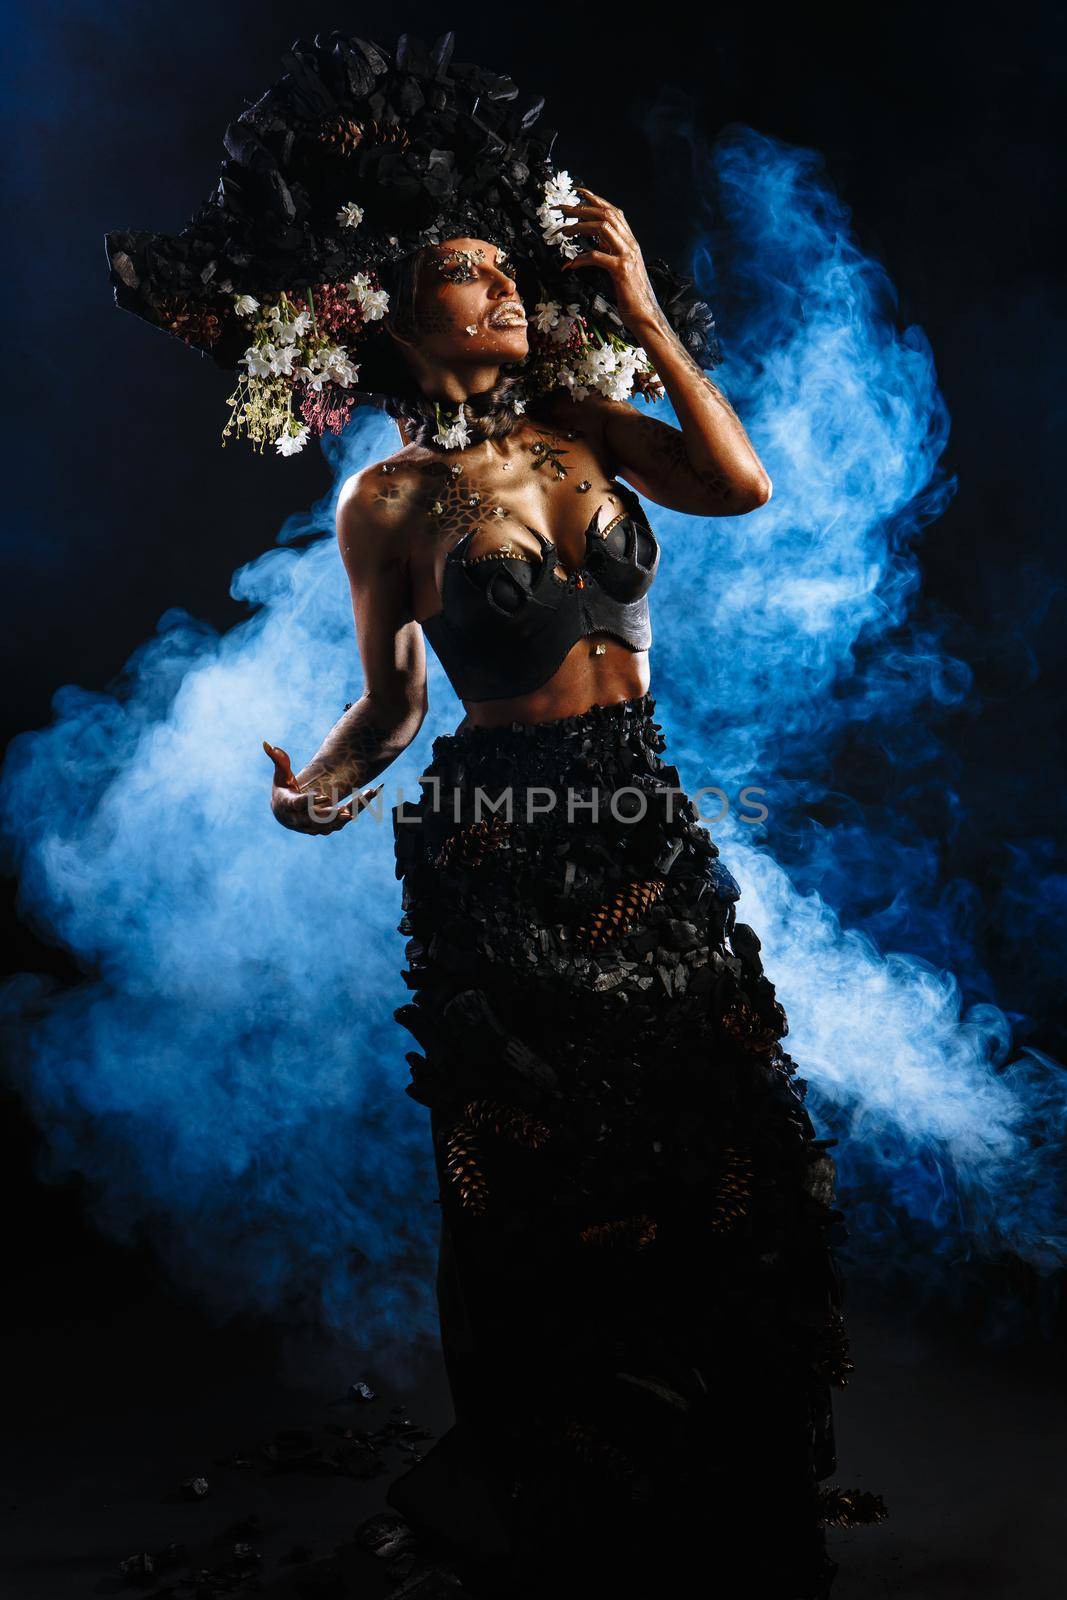 Portrait of a model in a headdress and dress made of coal. There is blue smoke behind the model.